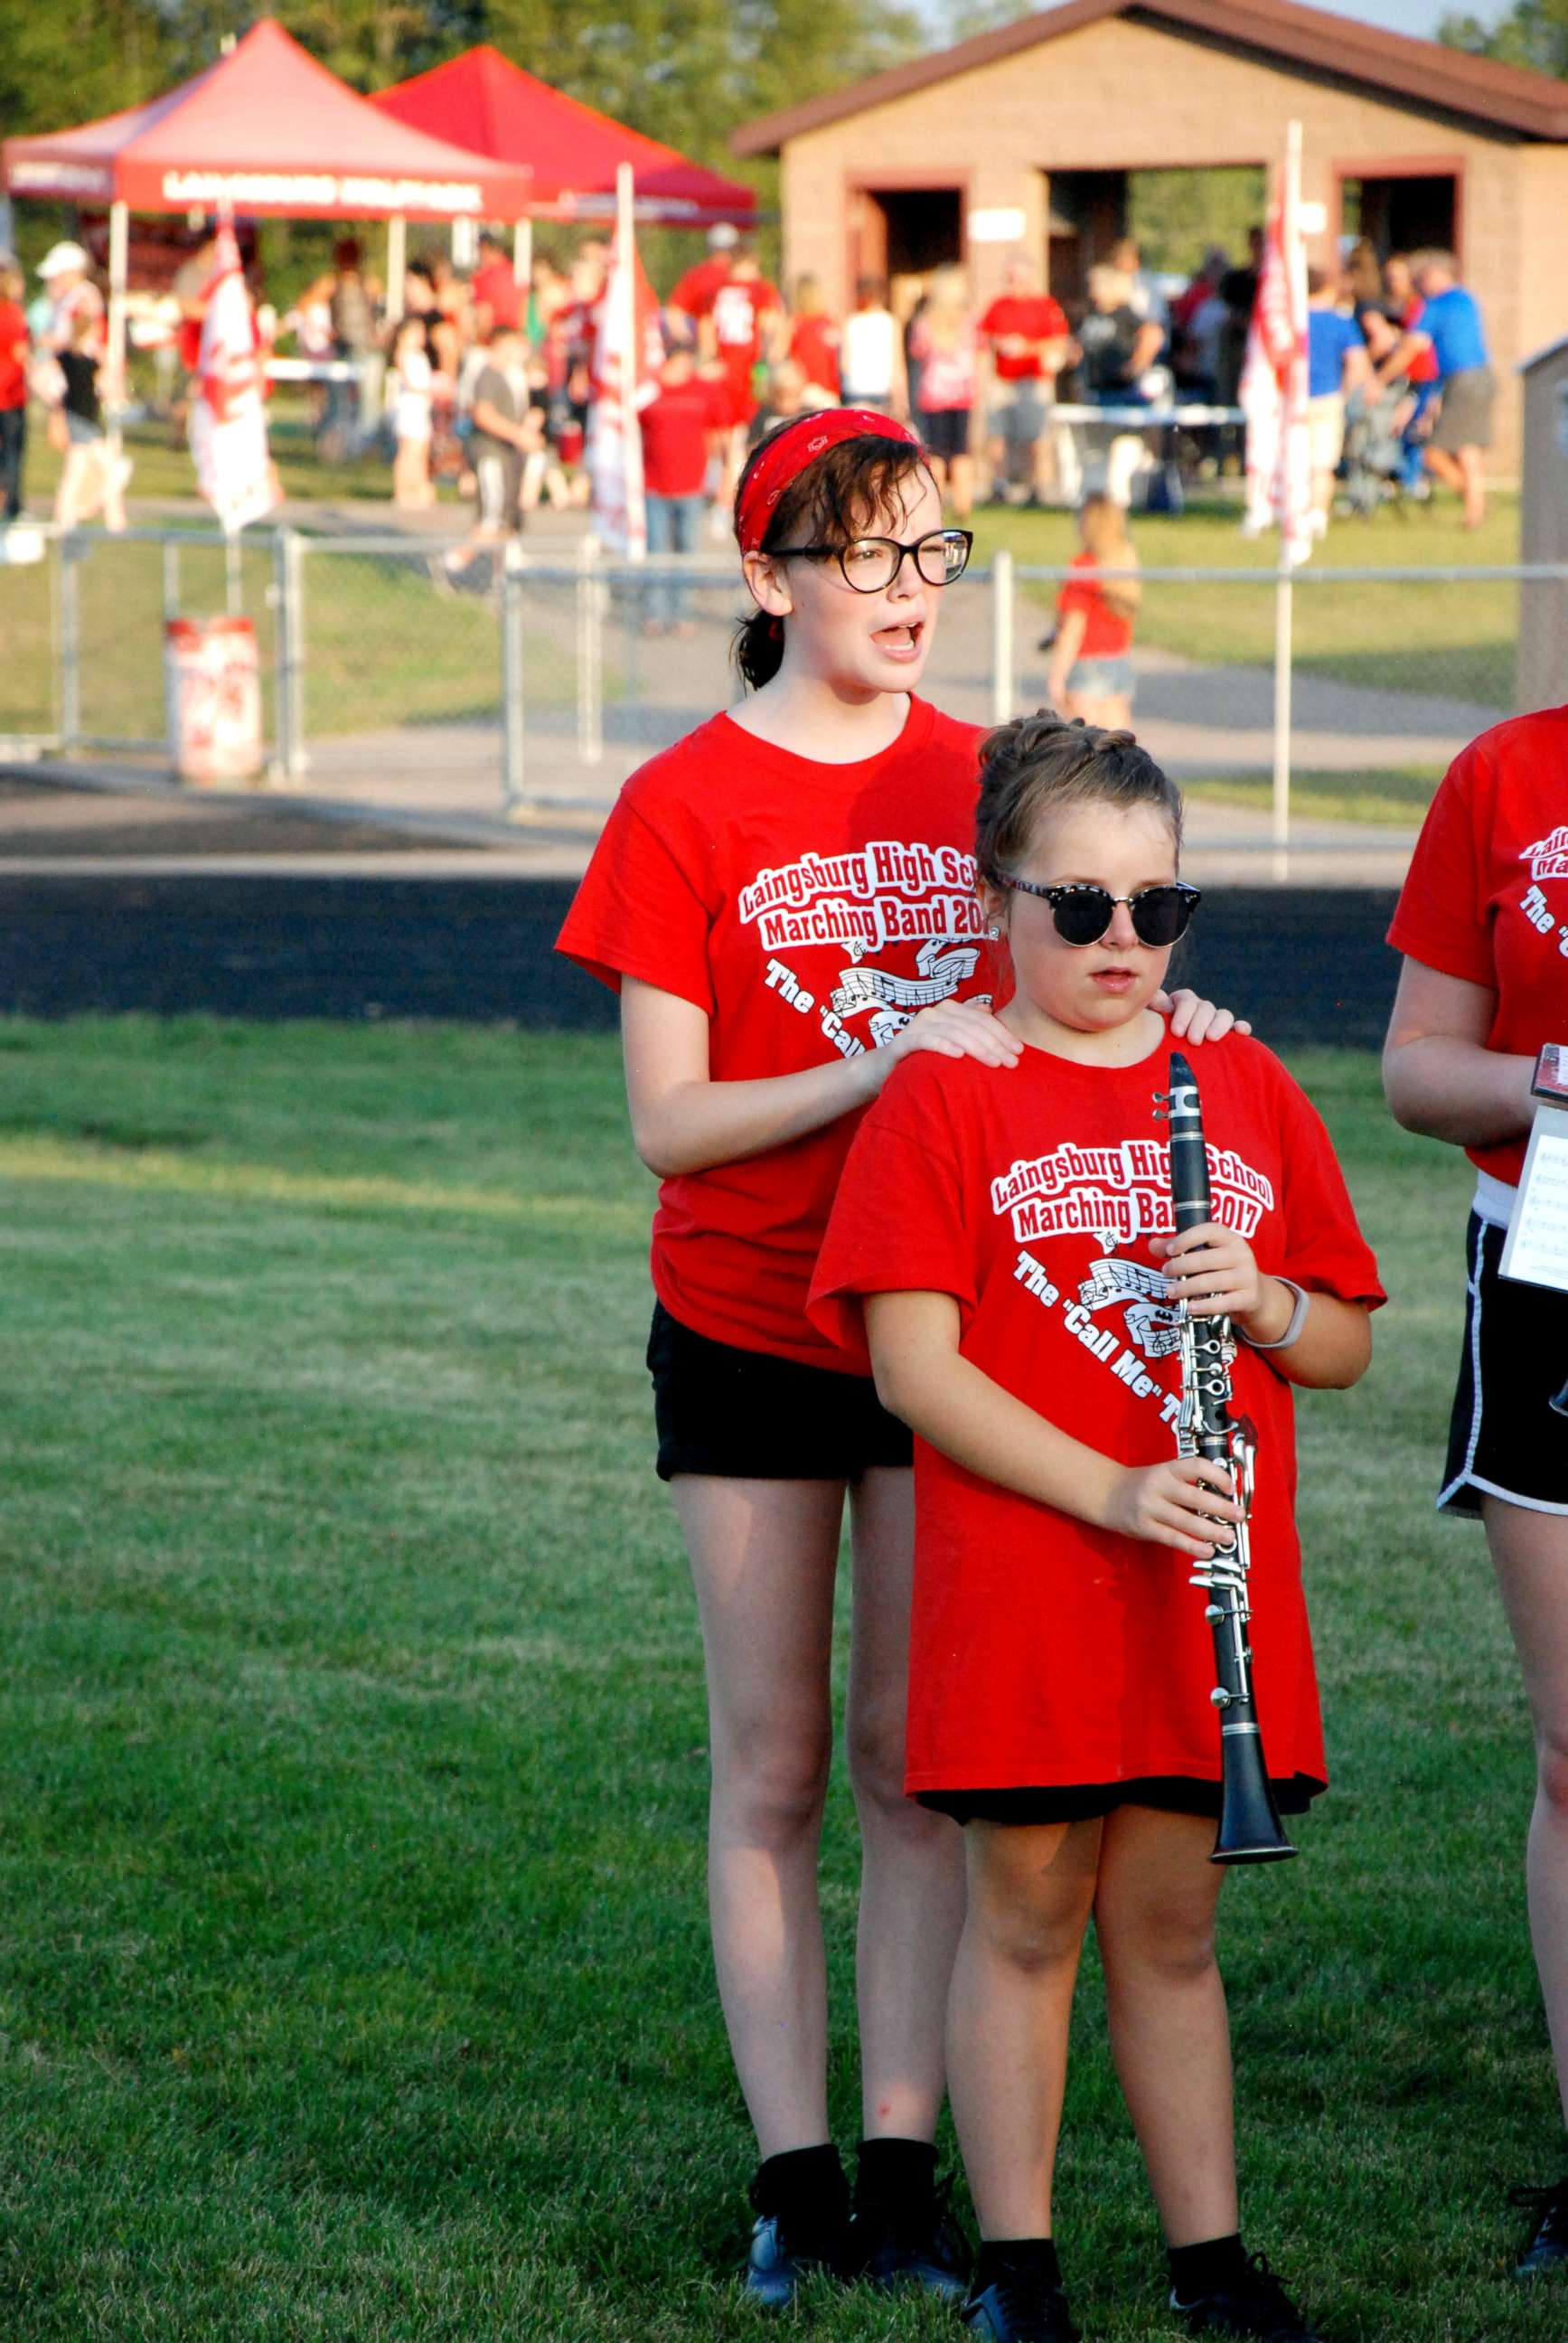 PHOTO: Autumn Michels, 14, who is visually impaired is guided in her high school's marching band by a fellow student, 17-year-old Rachael Steffens.